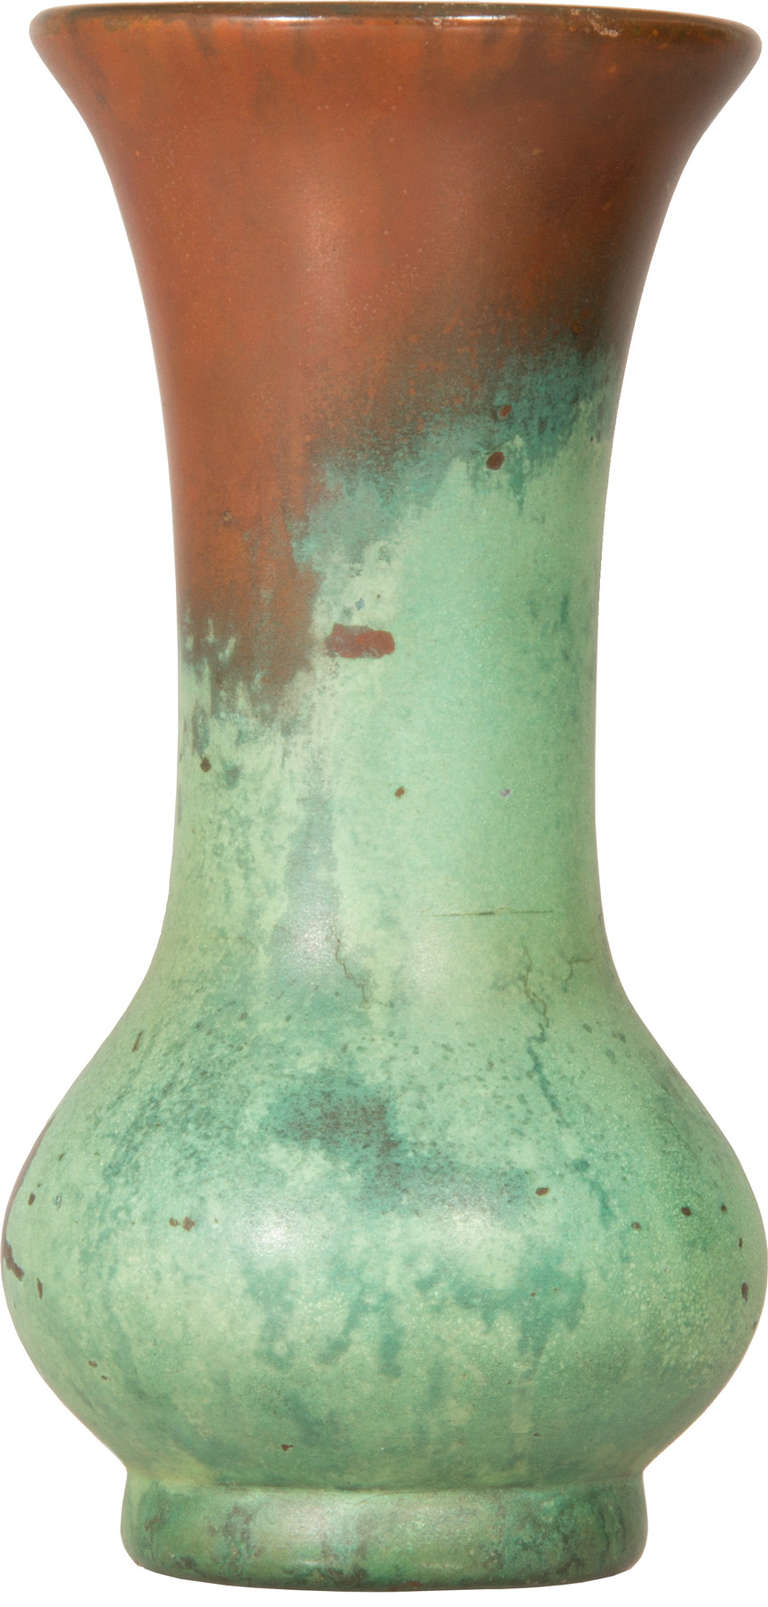 This is a vase  by  Charles Clewell.  Originally a metal worker,  he developed a glaze that looks like oxidized copper...a secret  formula that he took to the grave.